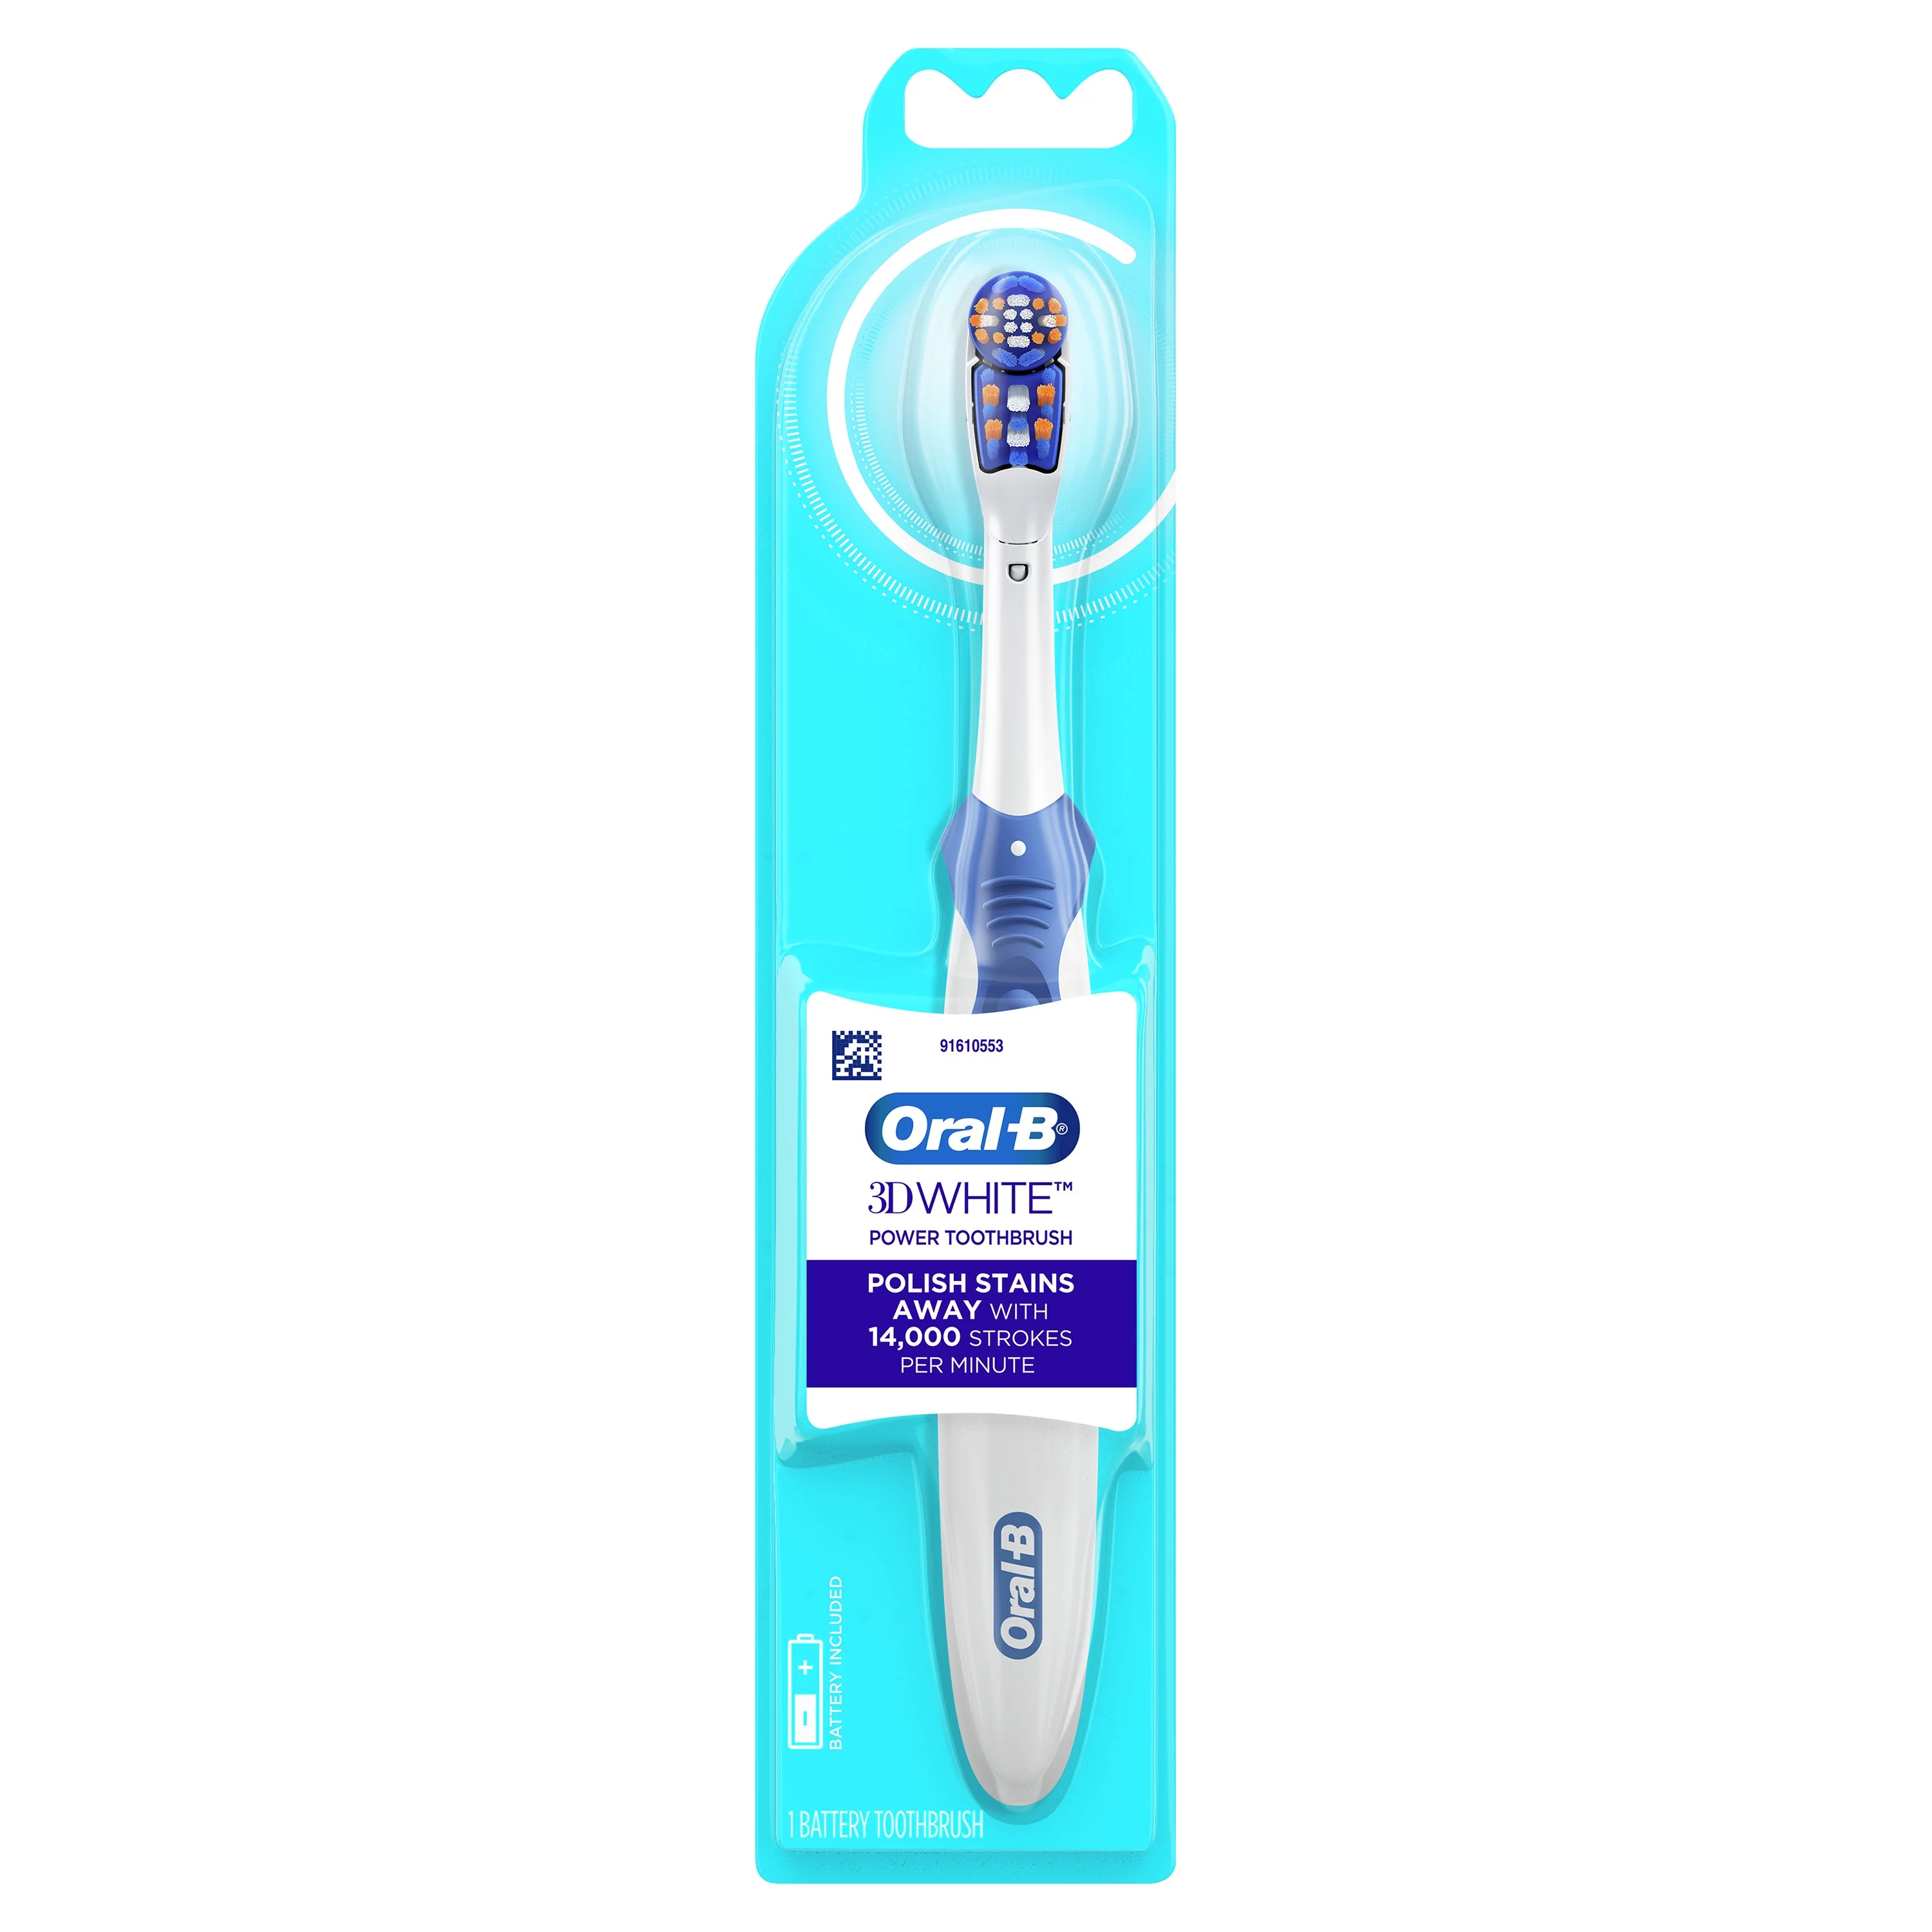 Oral-B 3D White Battery Toothbrush, 1 Count, Colors May Vary